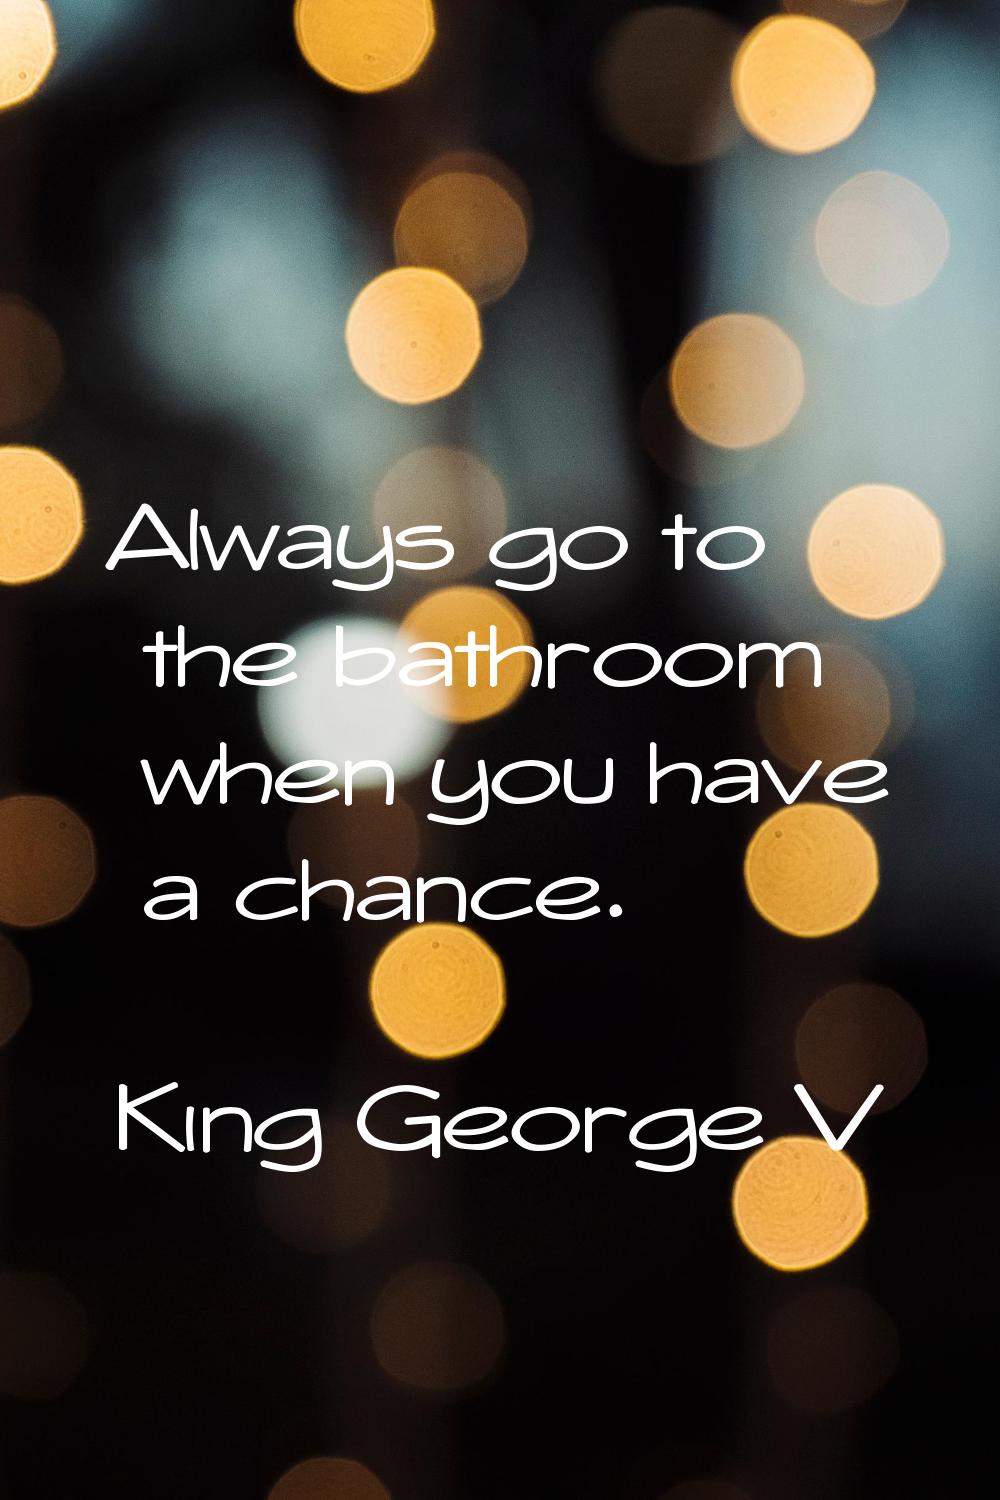 Always go to the bathroom when you have a chance.